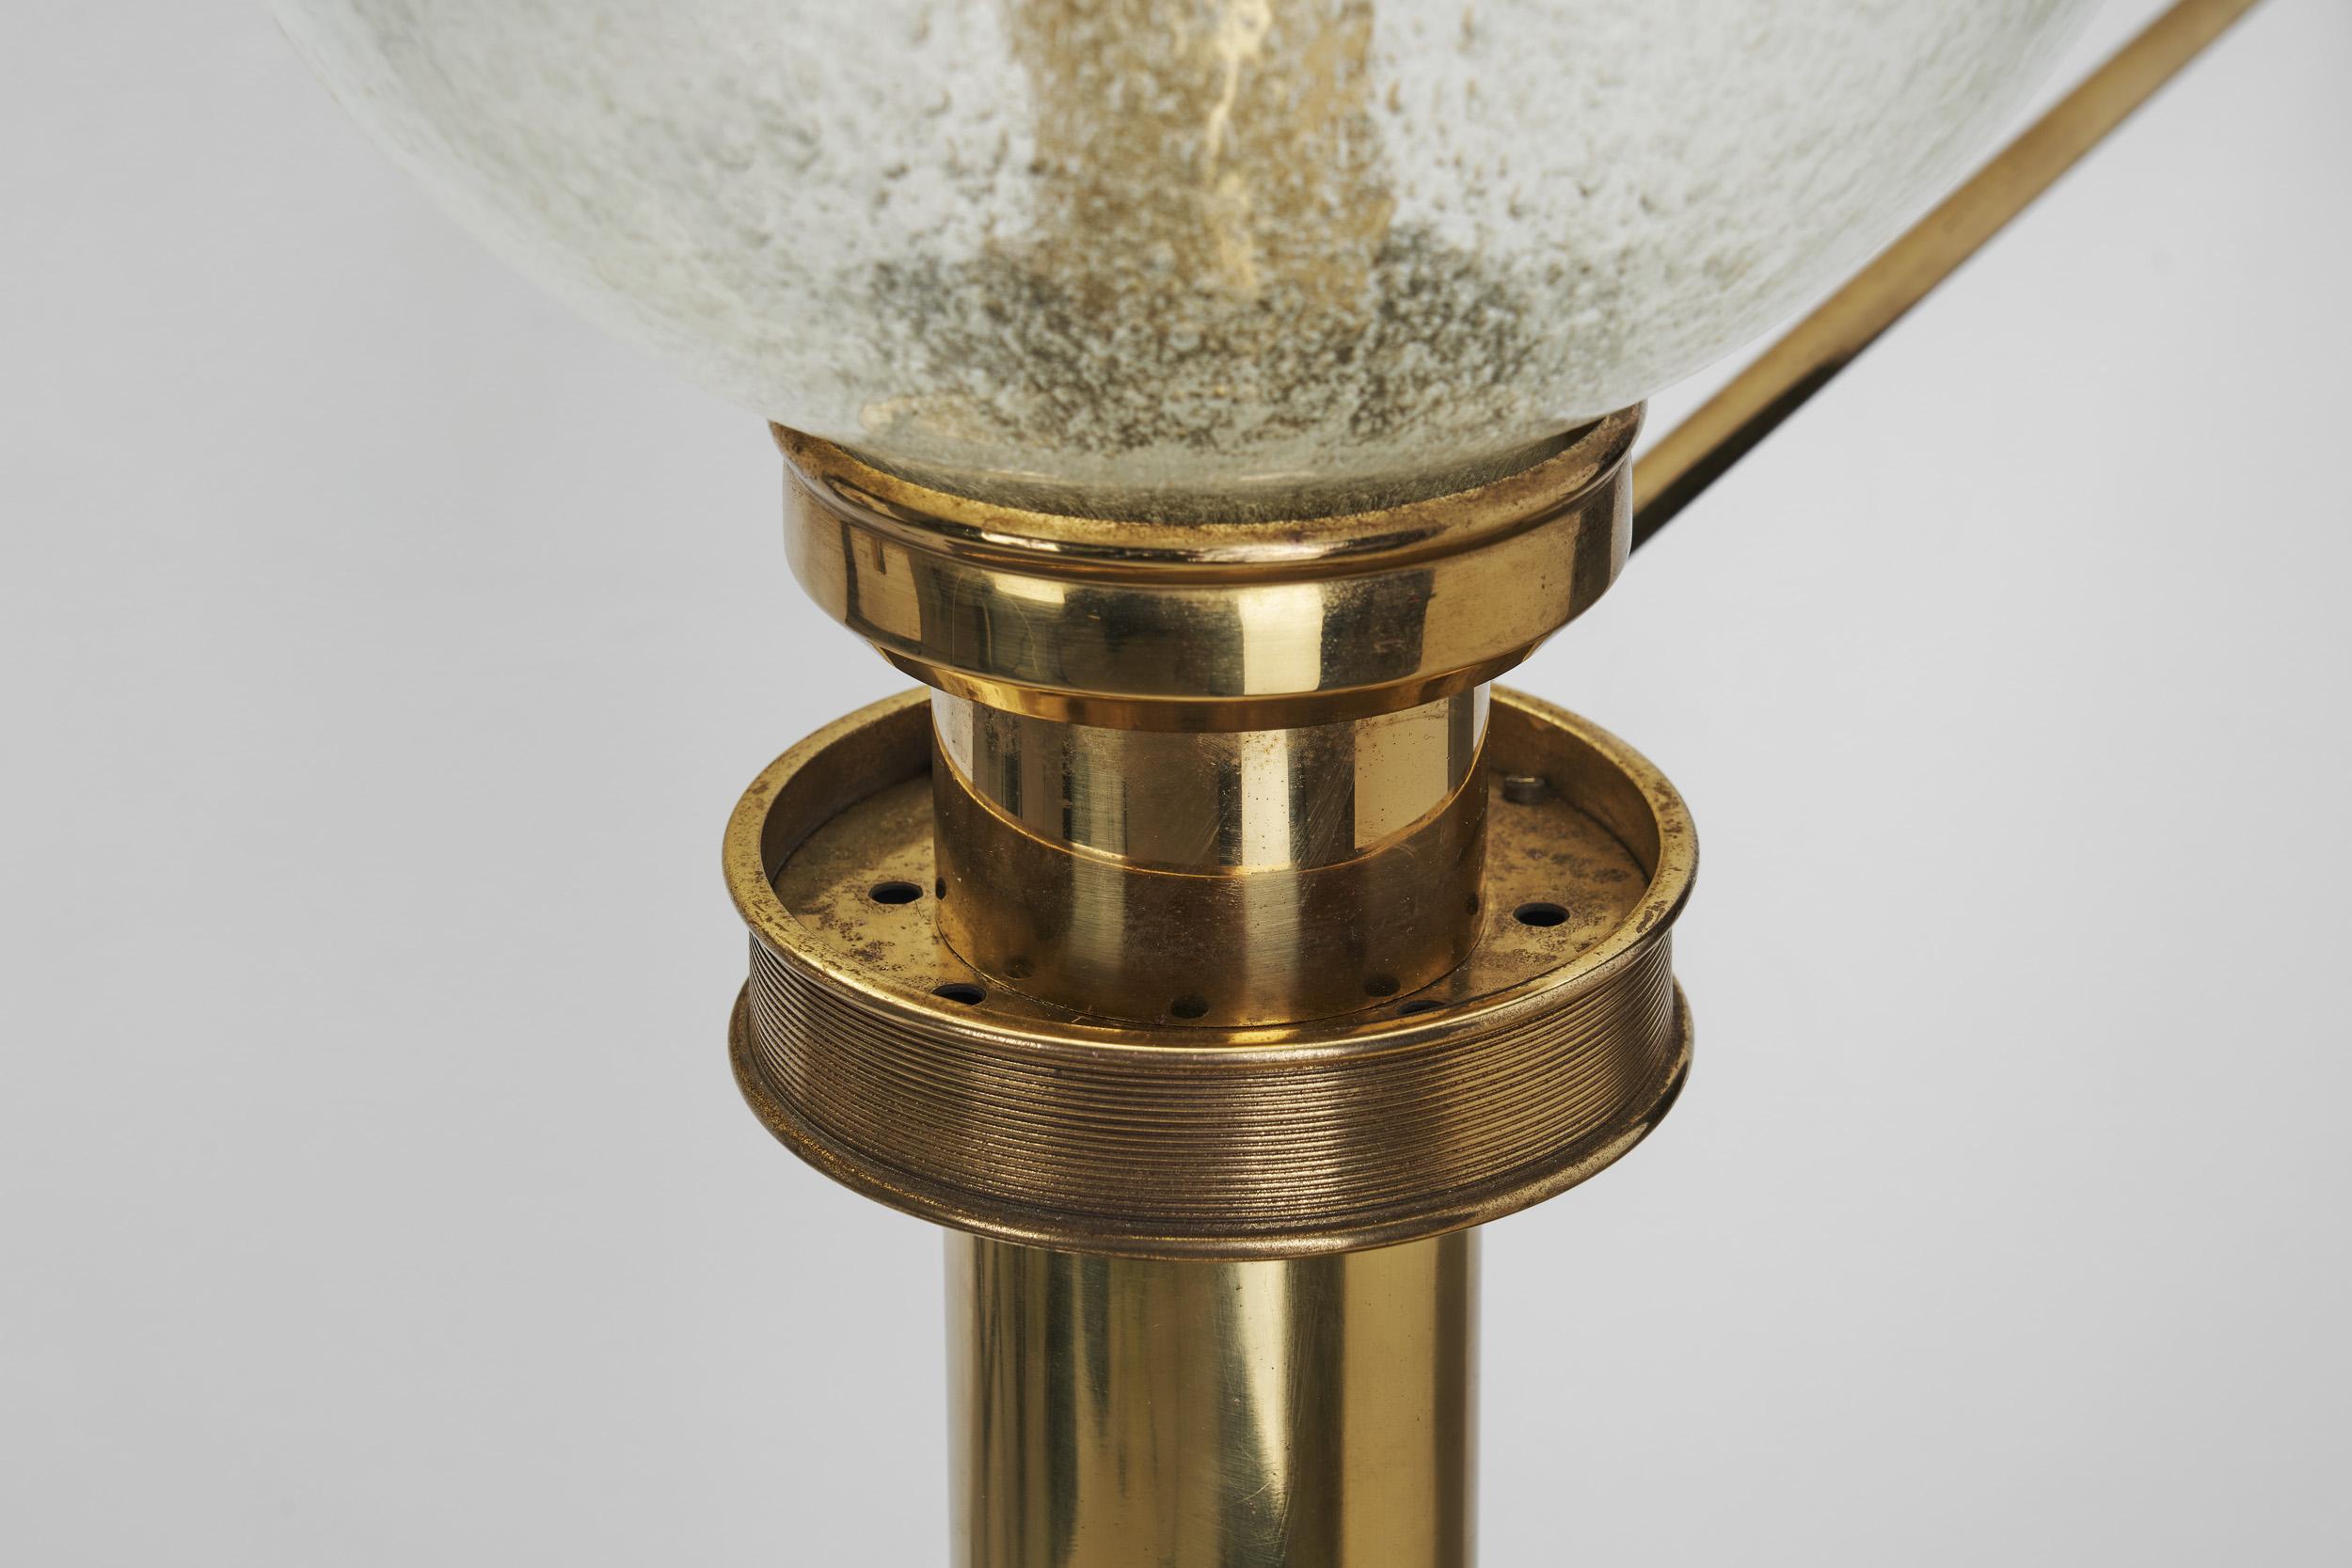 Large European Modern Wall Sconces in Brass & Bubble Glass, Europe, circa 1950s For Sale 6